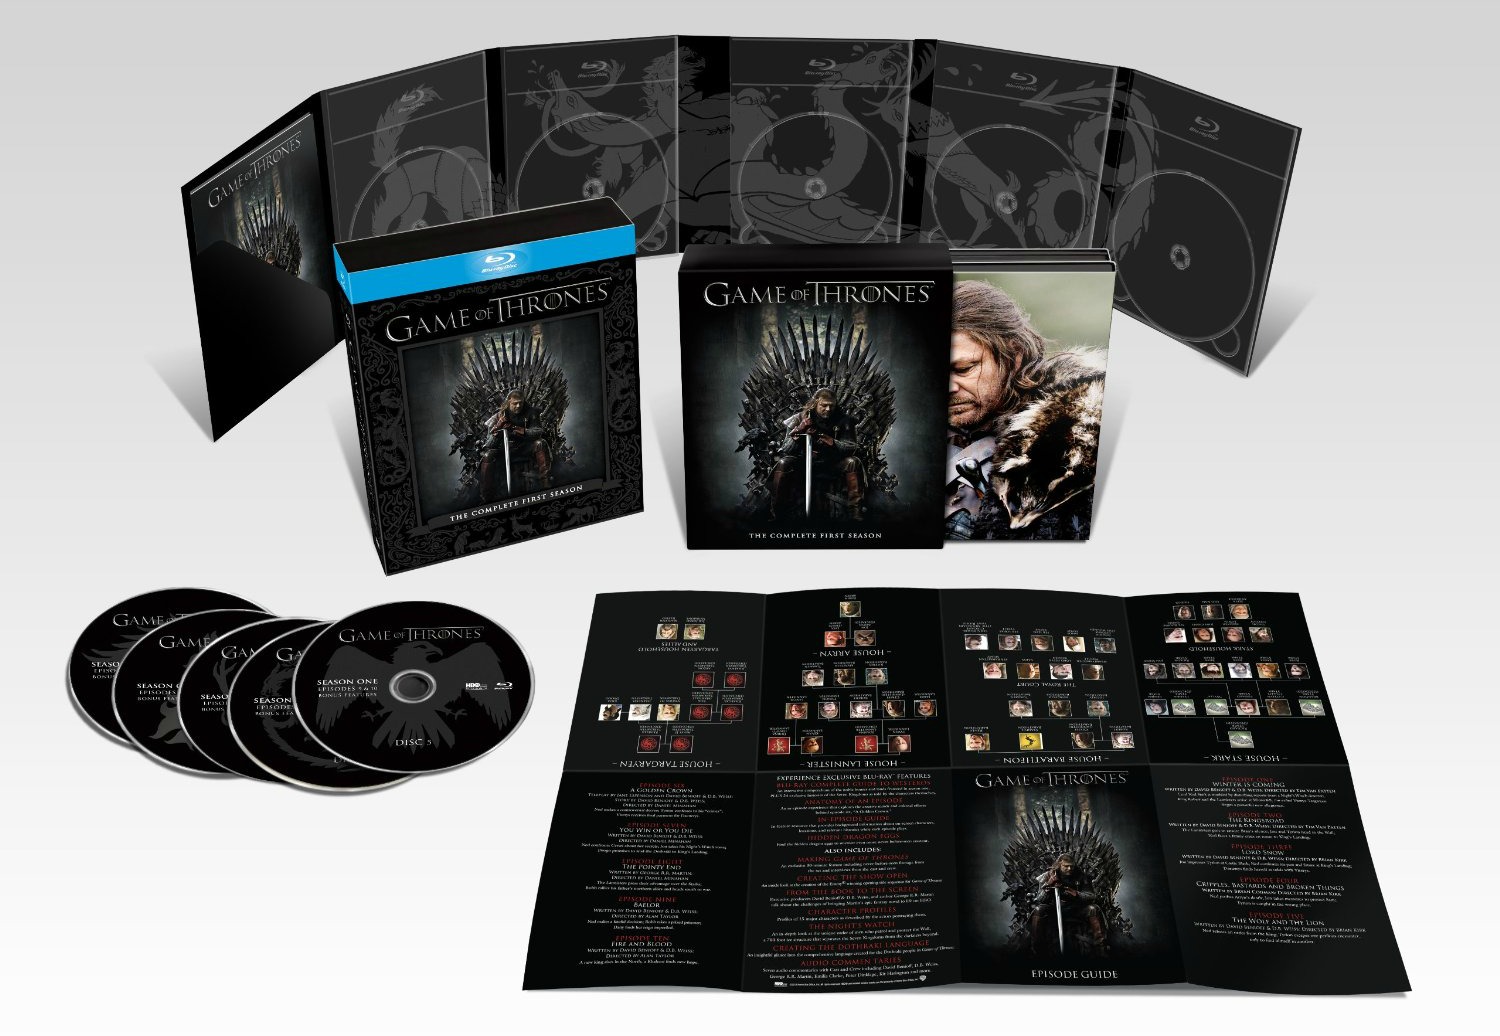 GAME OF THRONES: Season 1 Blu-ray/DVD Features List, Photo | FilmBook